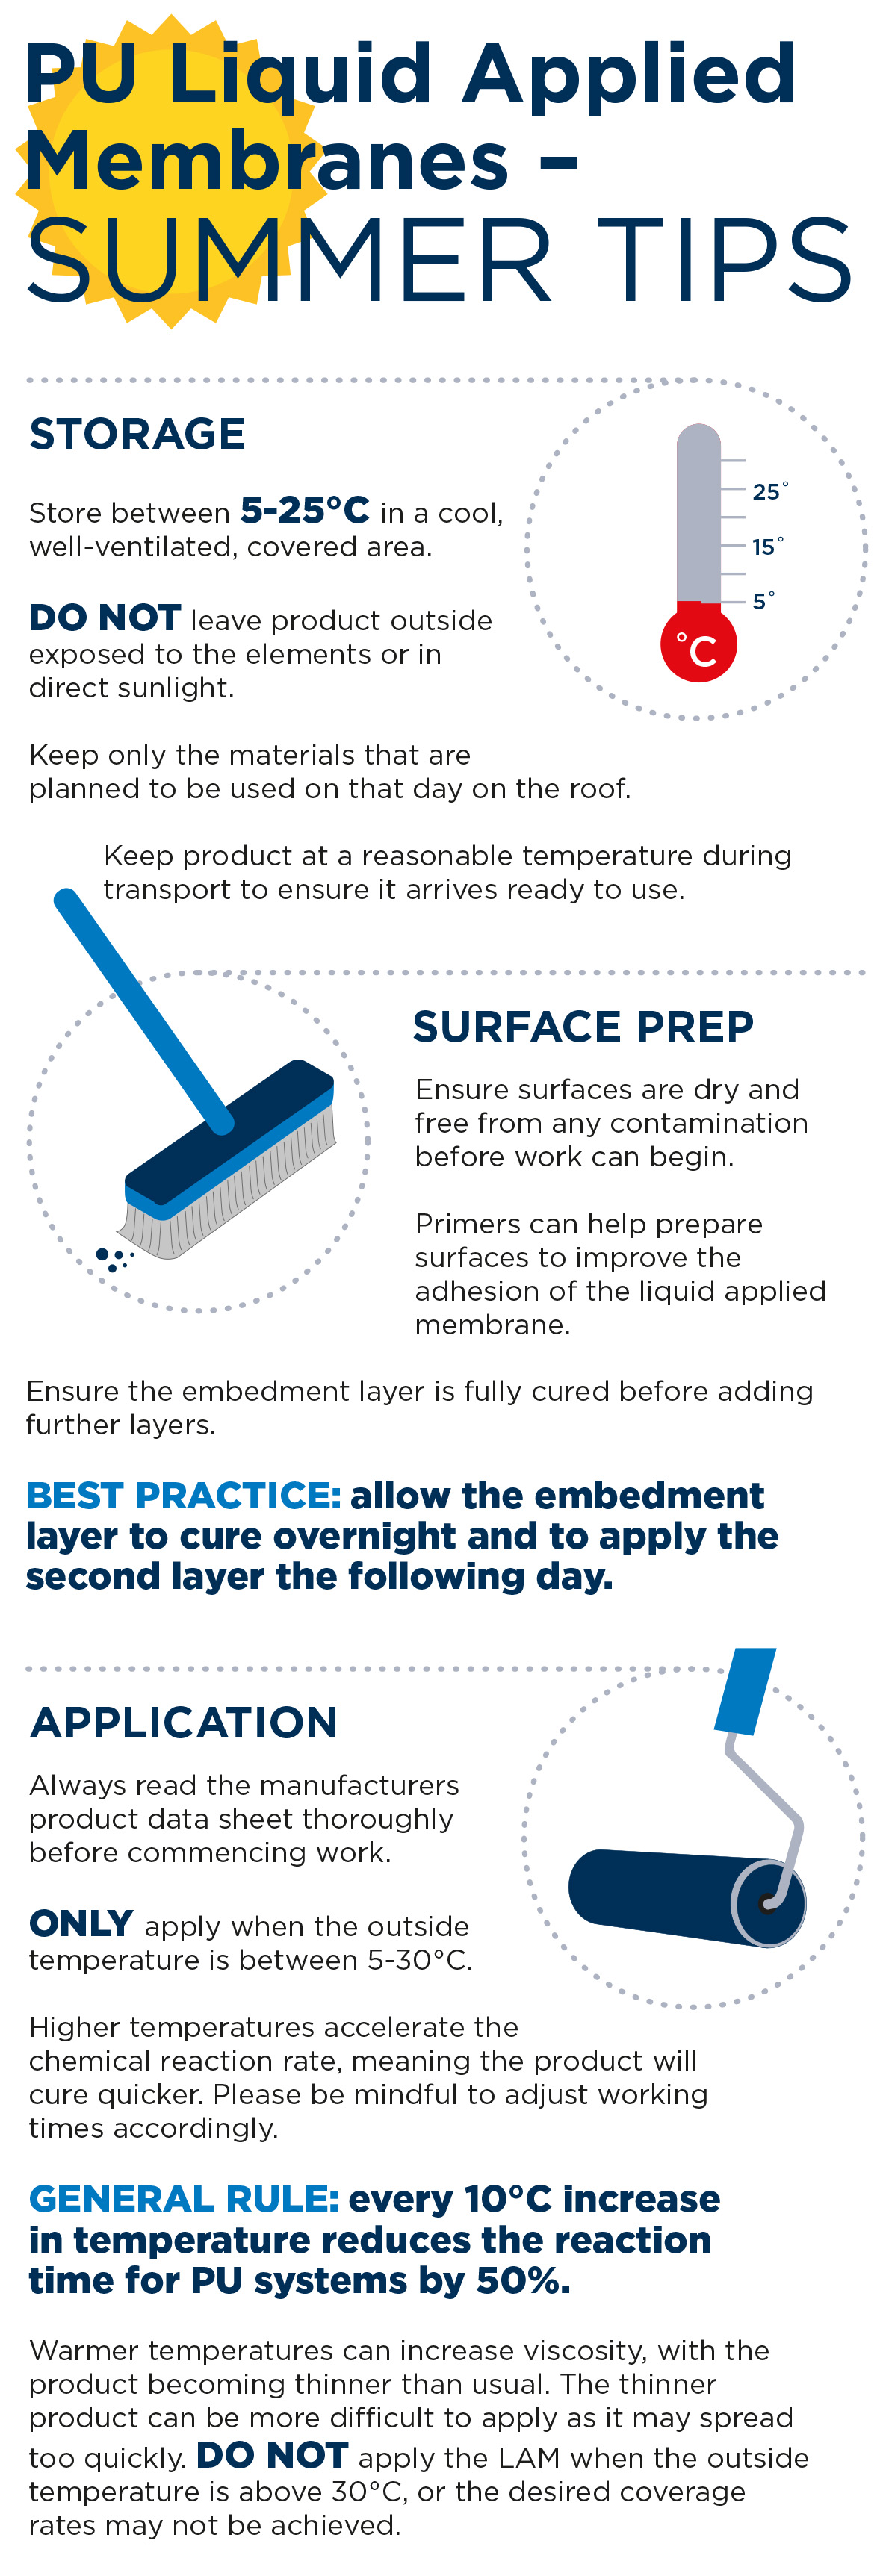 PU liquid applied membranes summer tips - infographic